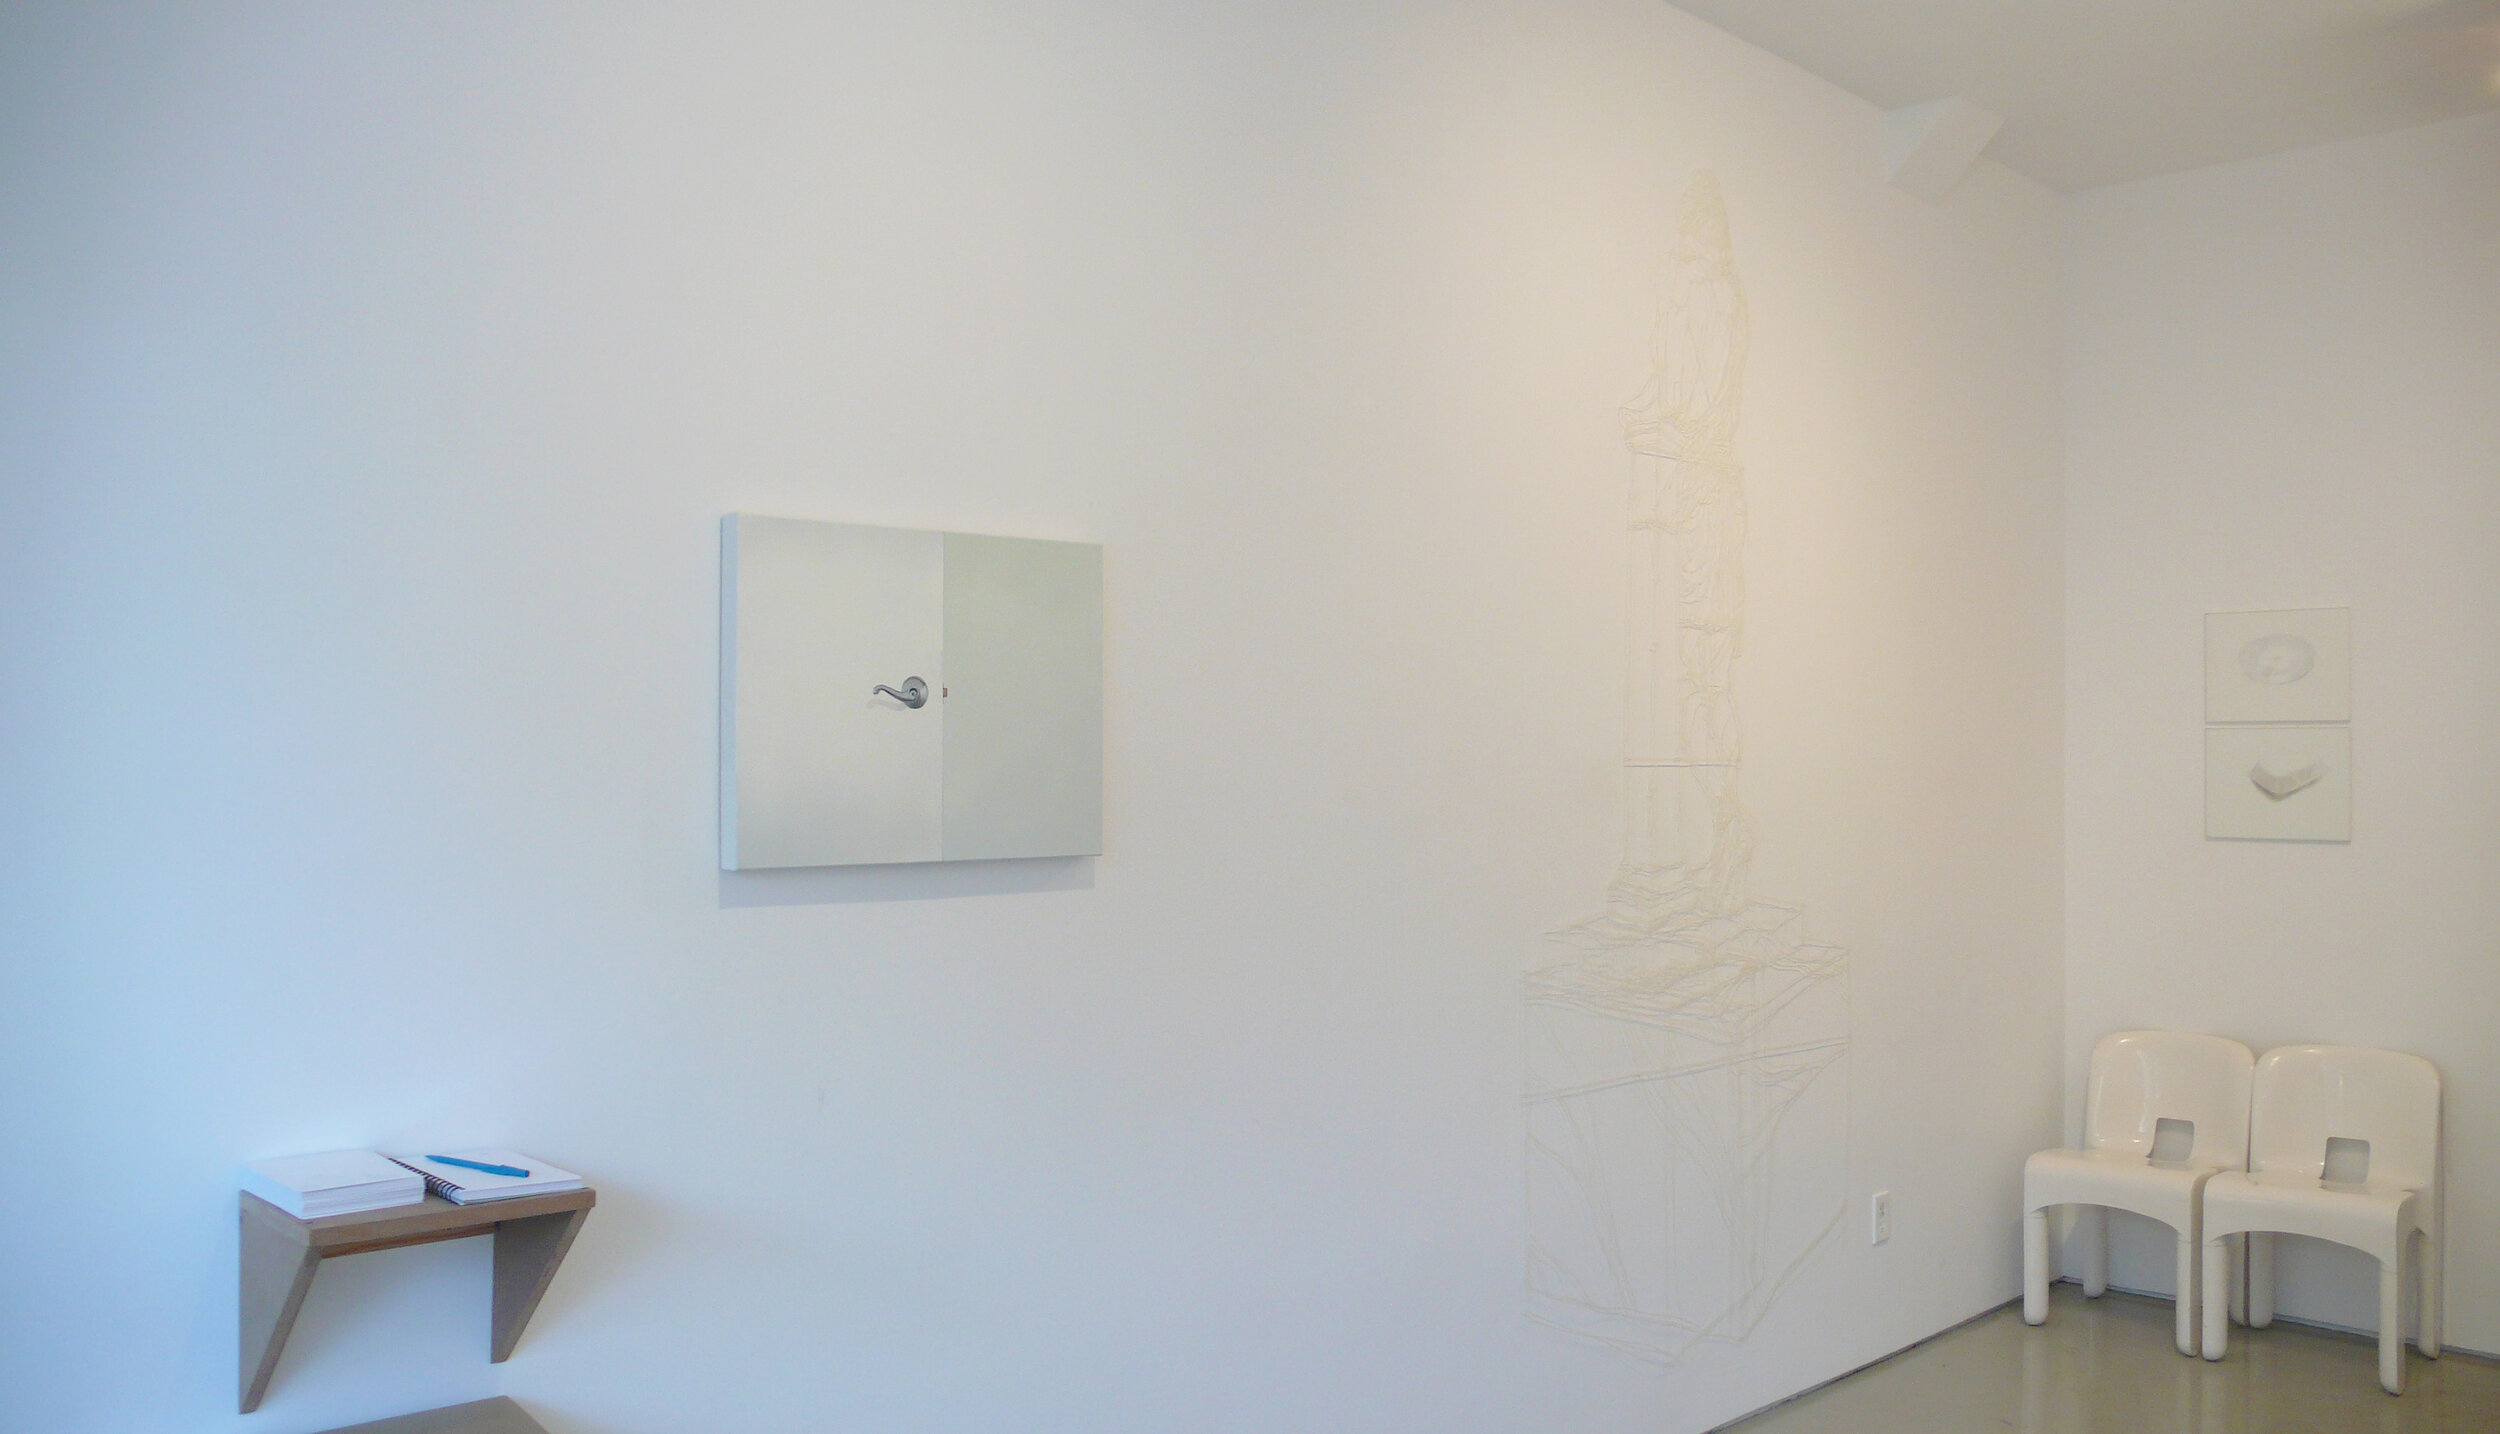 White on White, Curated by Eun Young Choi, featuring works by Boyce Cummings, Larry Lee, Miyeon Lee, K. Min, Jeremiah Teipen, Heeseop Yoon , at Cindy Rucker Gallery